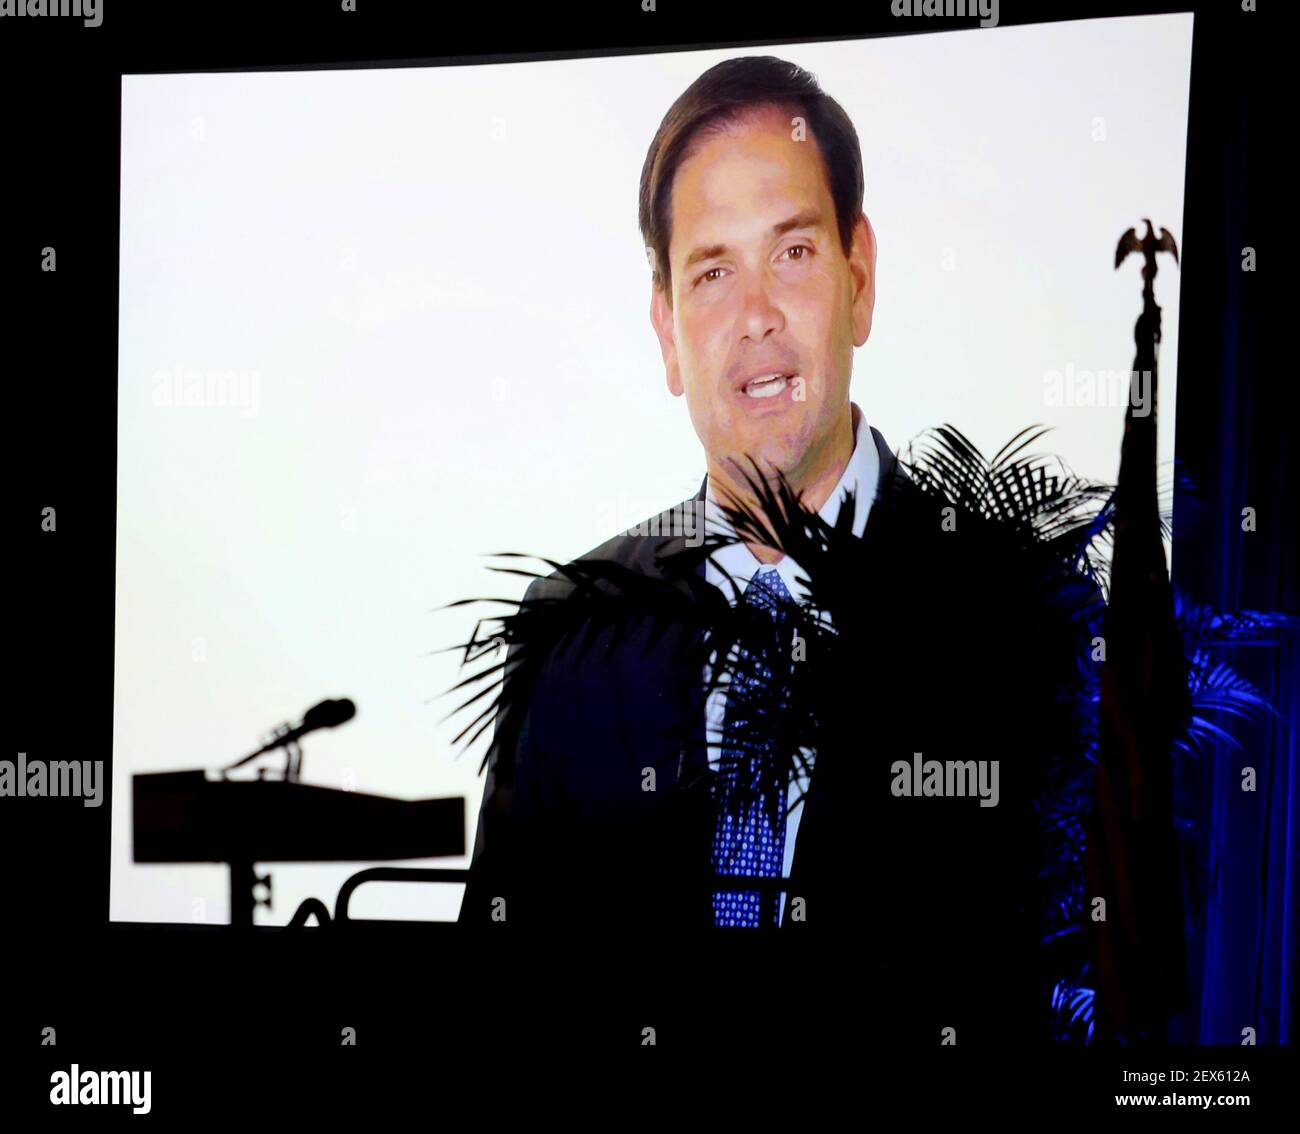 An empty podium is seen in the foreground as GOP presidential contender Sen. Marco Rubio delivers remarks via teleconference during Florida Gov. Rick Scott's Economic Growth Summit on Tuesday, June 2, 2015, at the Yacht & Beach Club Convention Center at Walt Disney World in Lake Buena Vista, Fla. Rubio had to cancel his appearance due to U.S. Senate business. (Photo by Joe Burbank/Orlando Sentinel/TNS) *** Please Use Credit from Credit Field *** Stock Photo